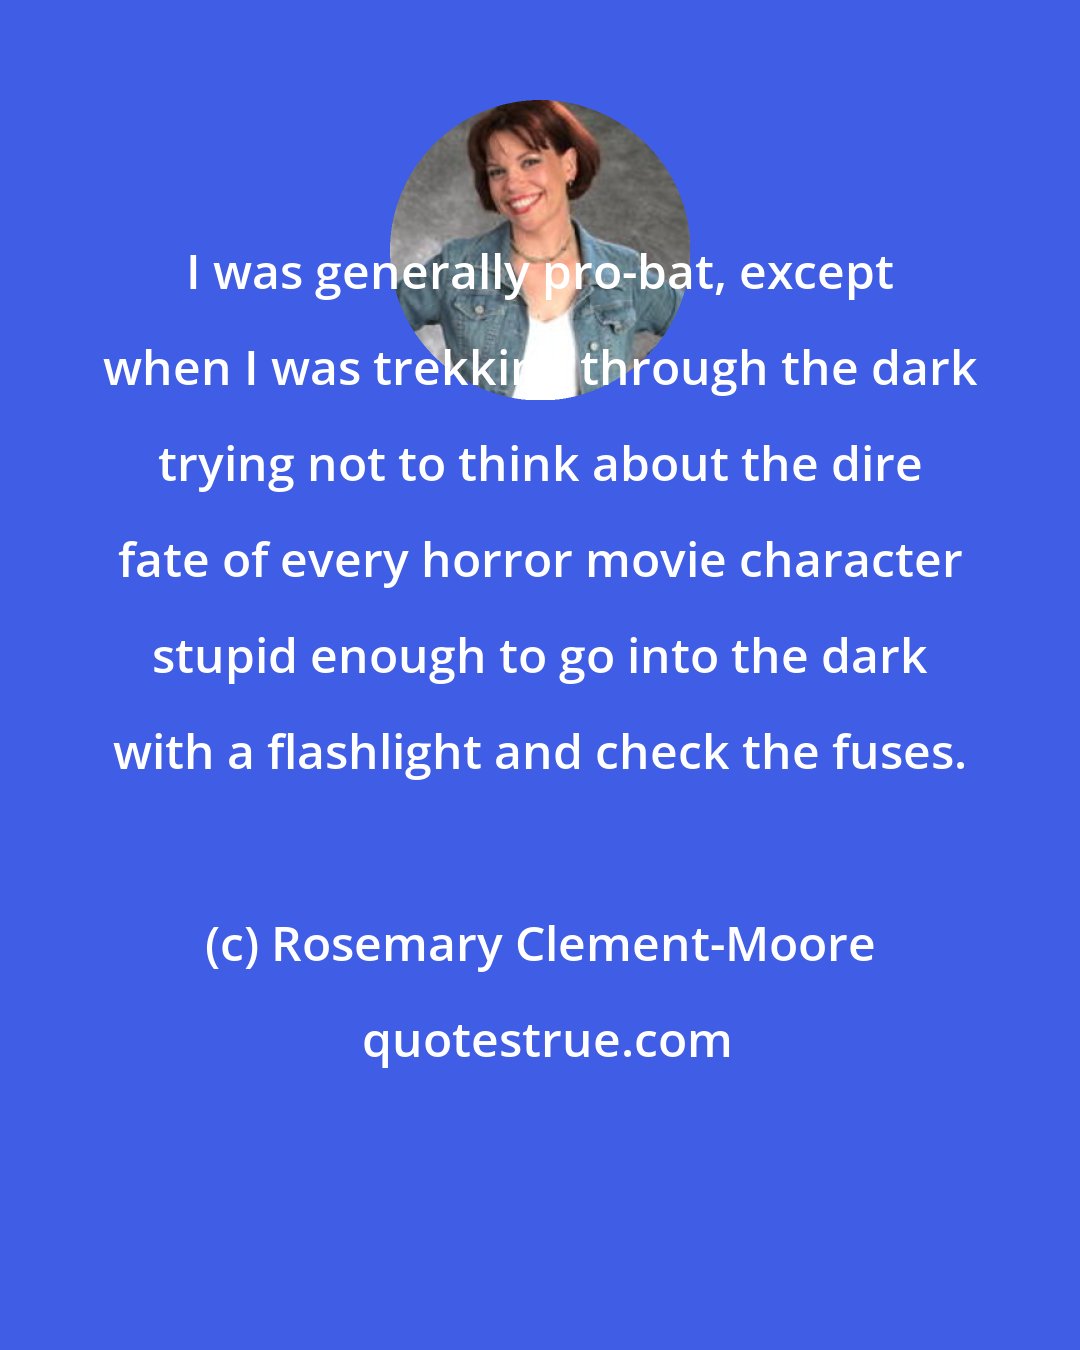 Rosemary Clement-Moore: I was generally pro-bat, except when I was trekking through the dark trying not to think about the dire fate of every horror movie character stupid enough to go into the dark with a flashlight and check the fuses.